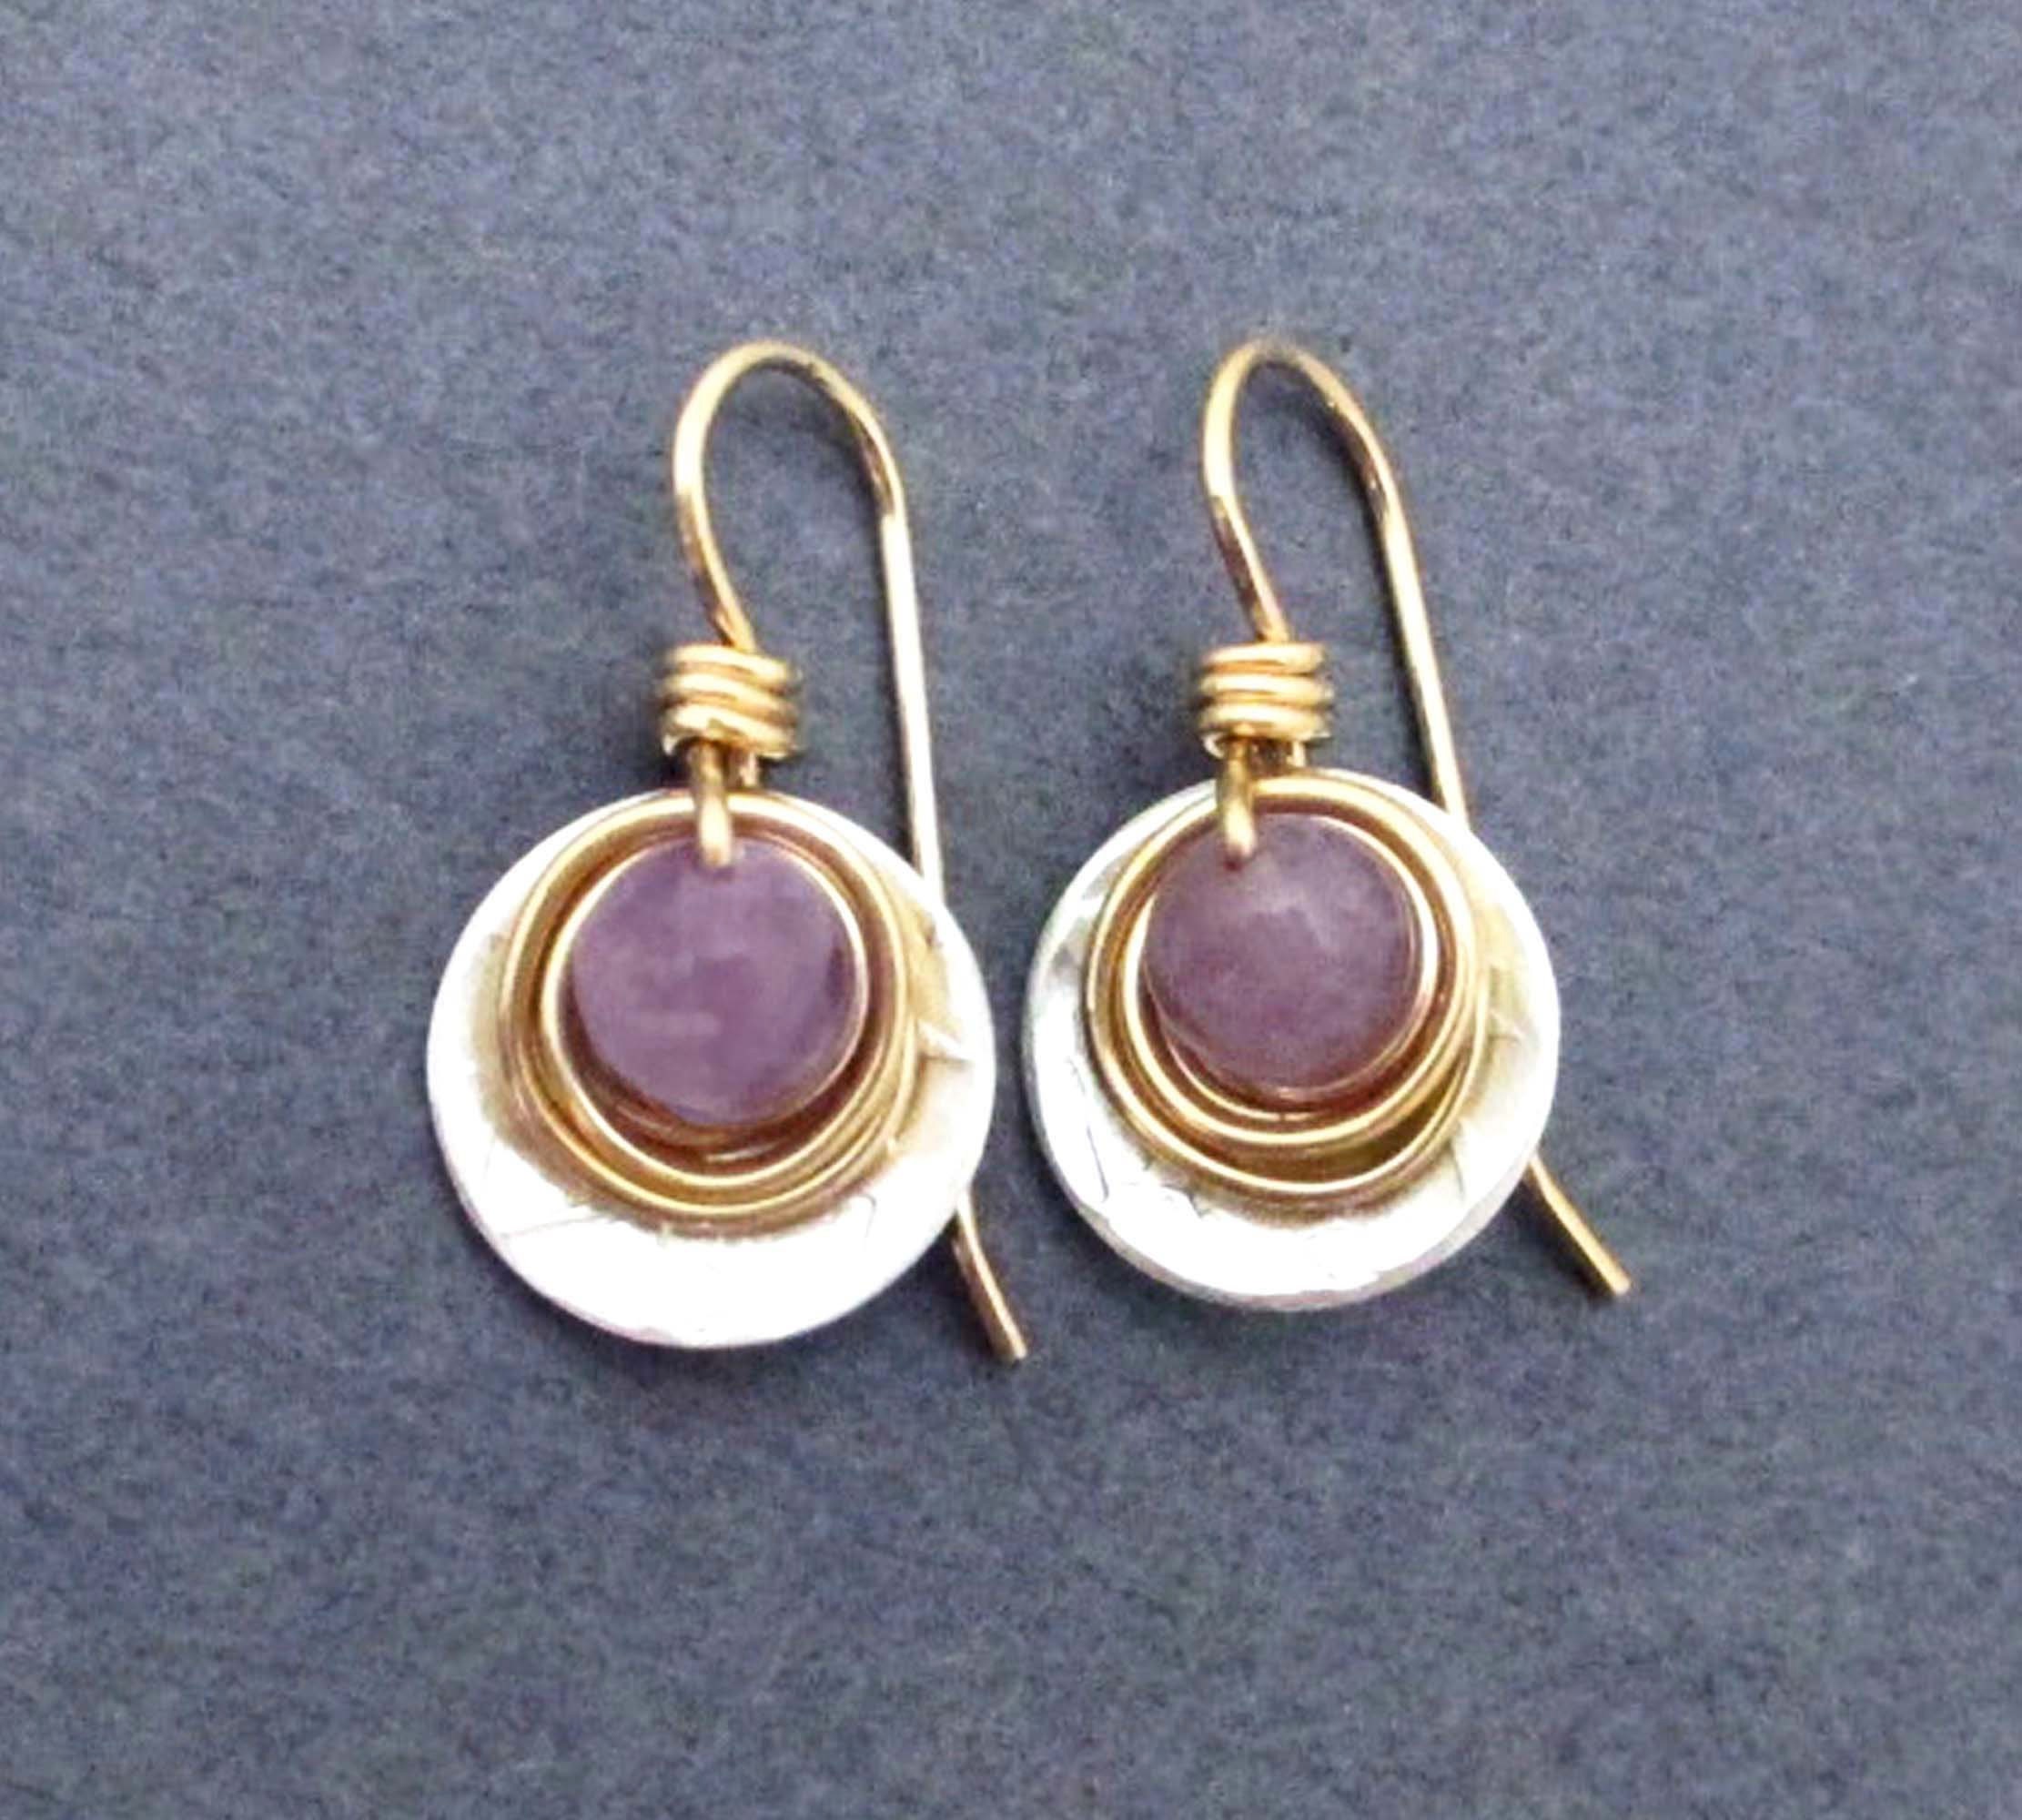 Genuine Lavender Amethyst Earrings Mixed Metal Silver and Gold | Etsy